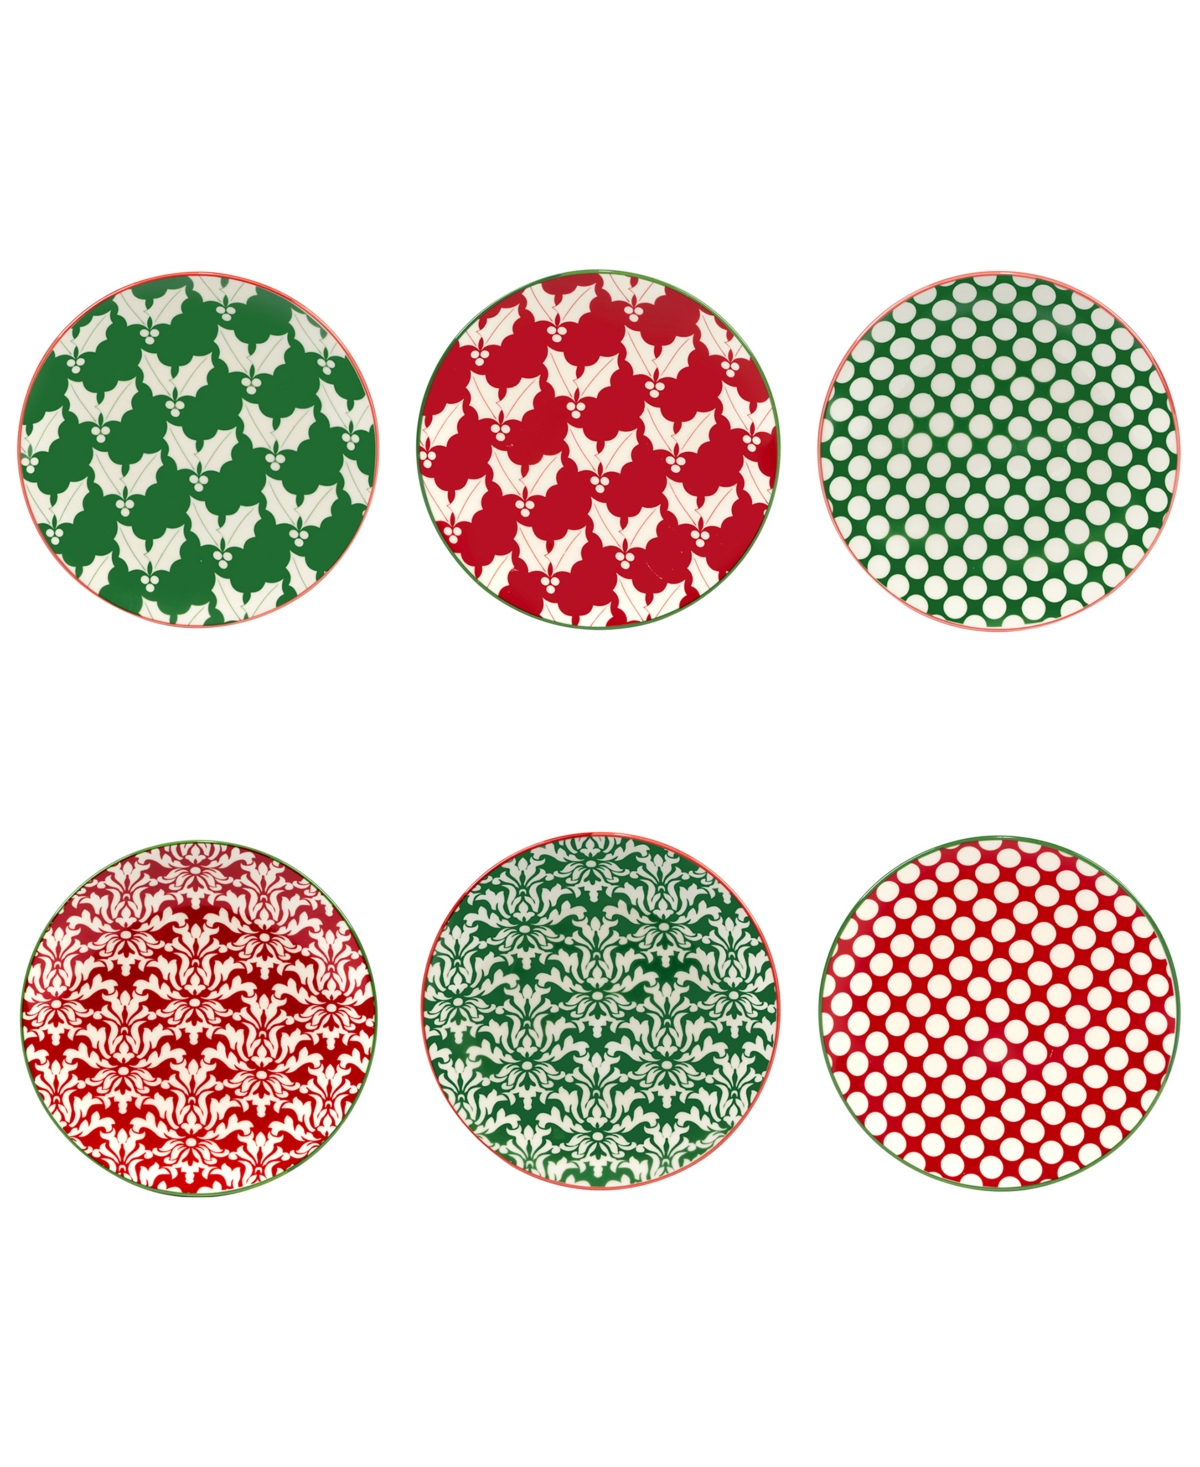 Winter Medley 6" Canape Plates Set of 6, Service for 6 - Multi